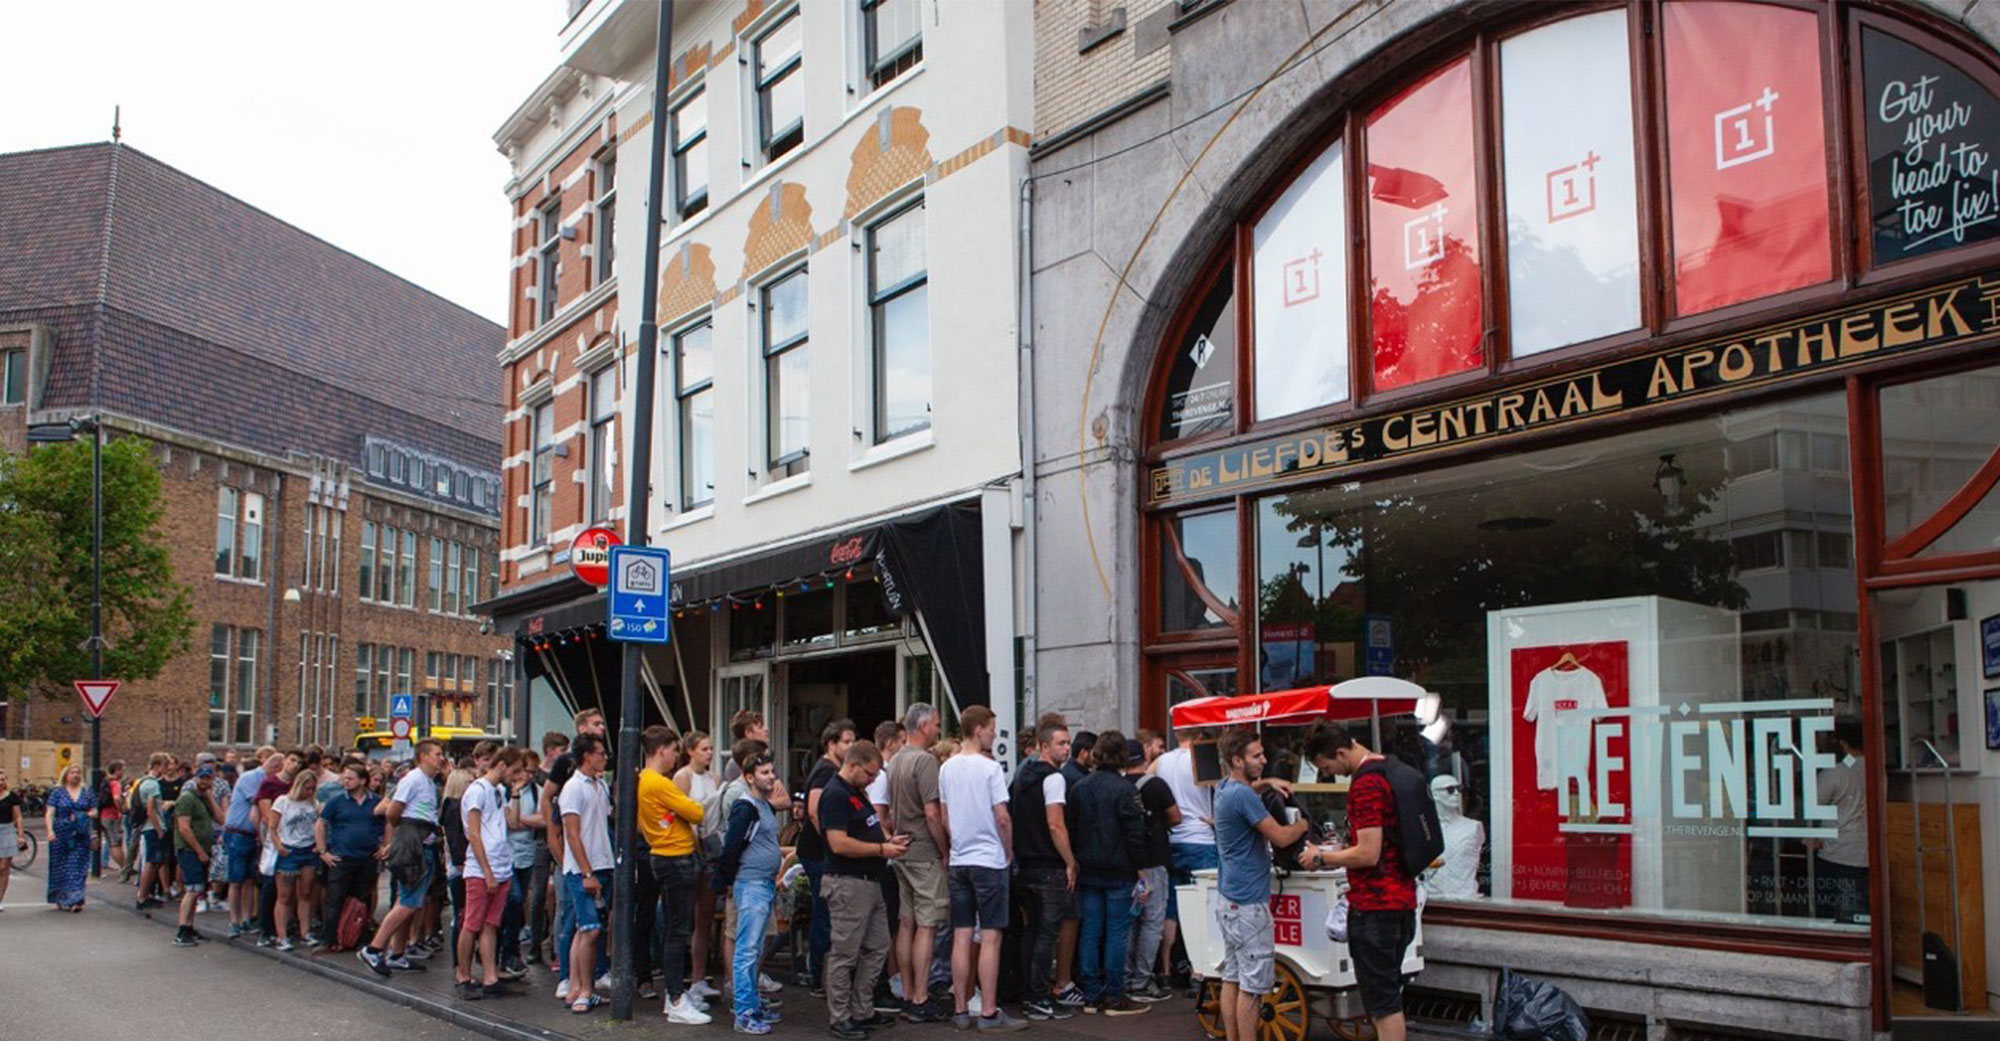 People are lining up for OnePlus 6 in Utrecht Netherlands 1